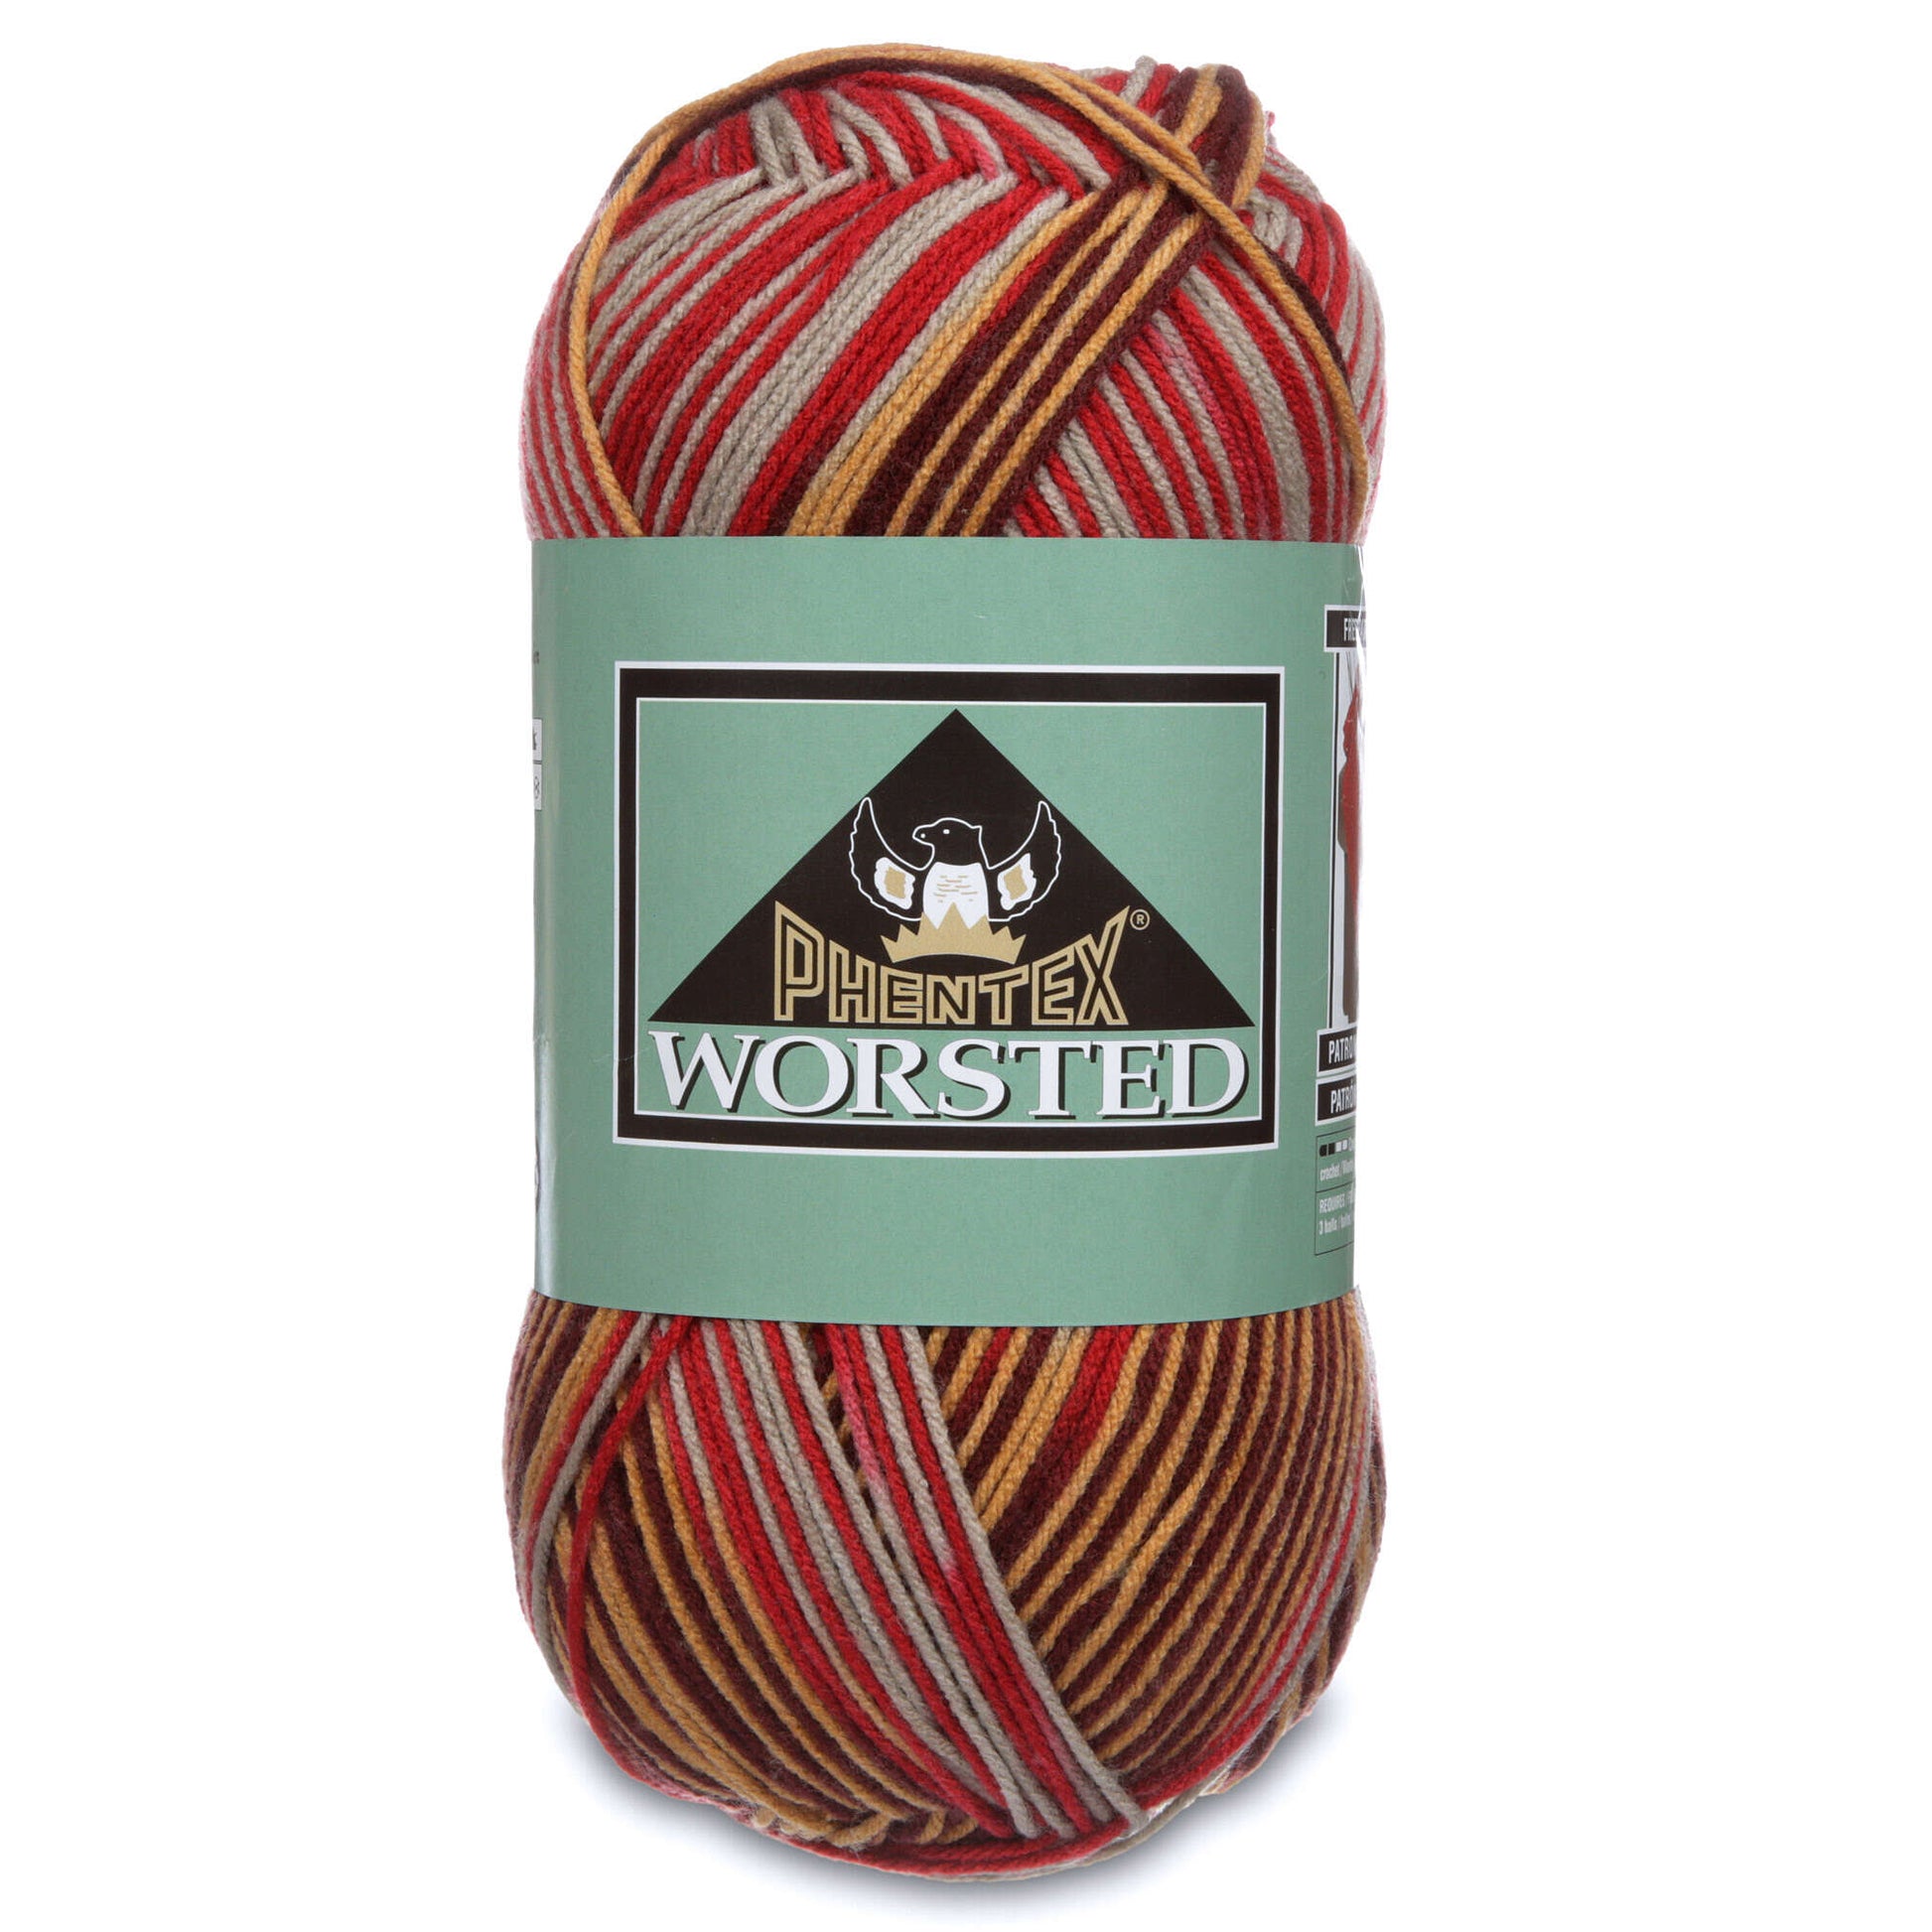 Phentex Worsted Ombre Yarn - Discontinued Shades Marrakech Ombre